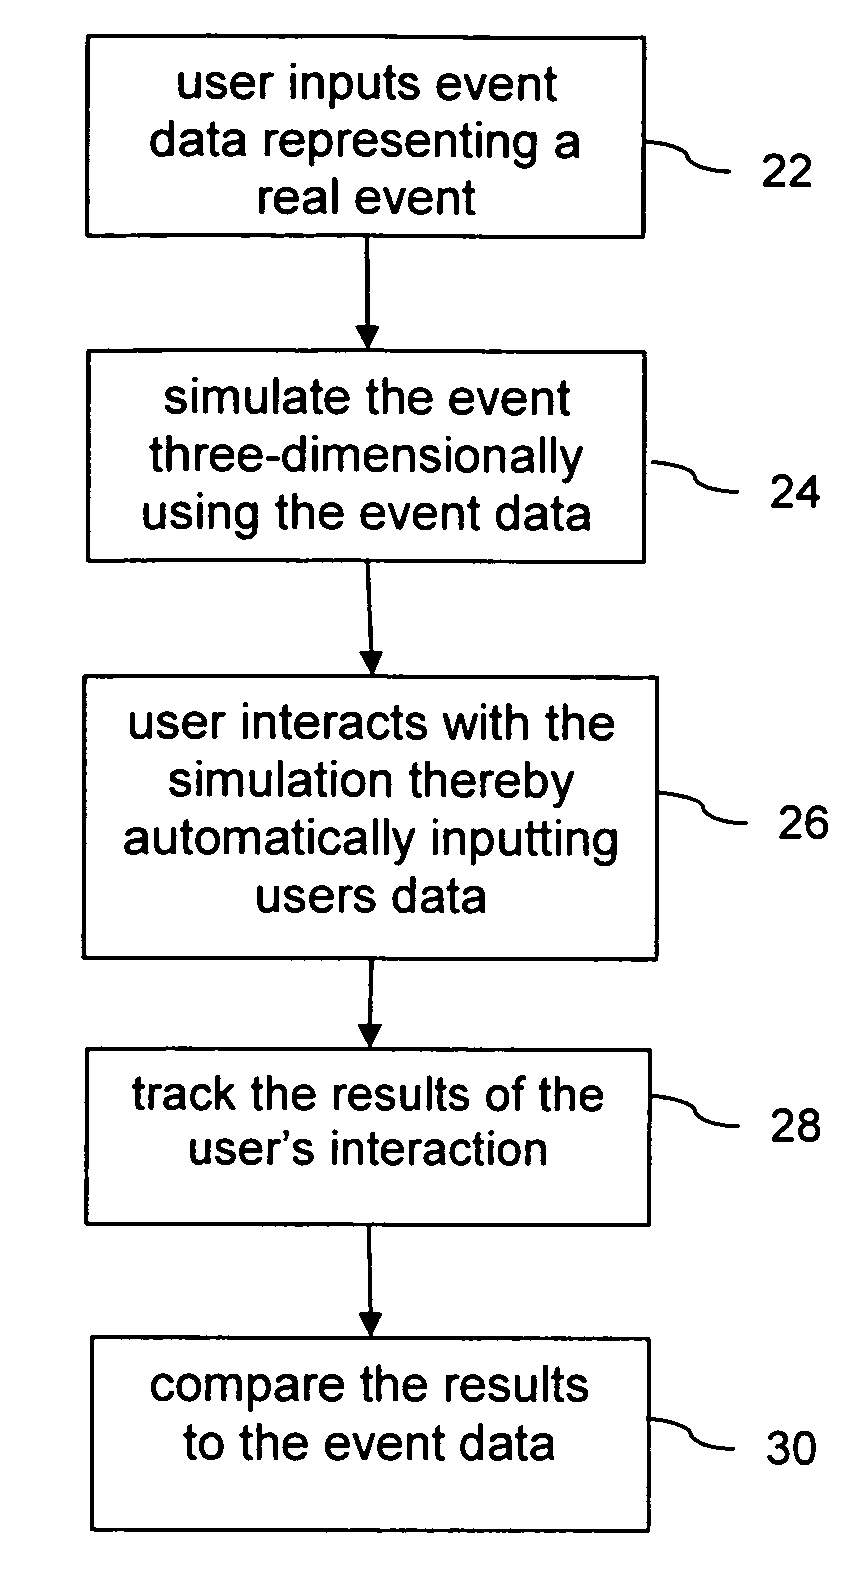 Simulation process with user-defined factors for interactive user training